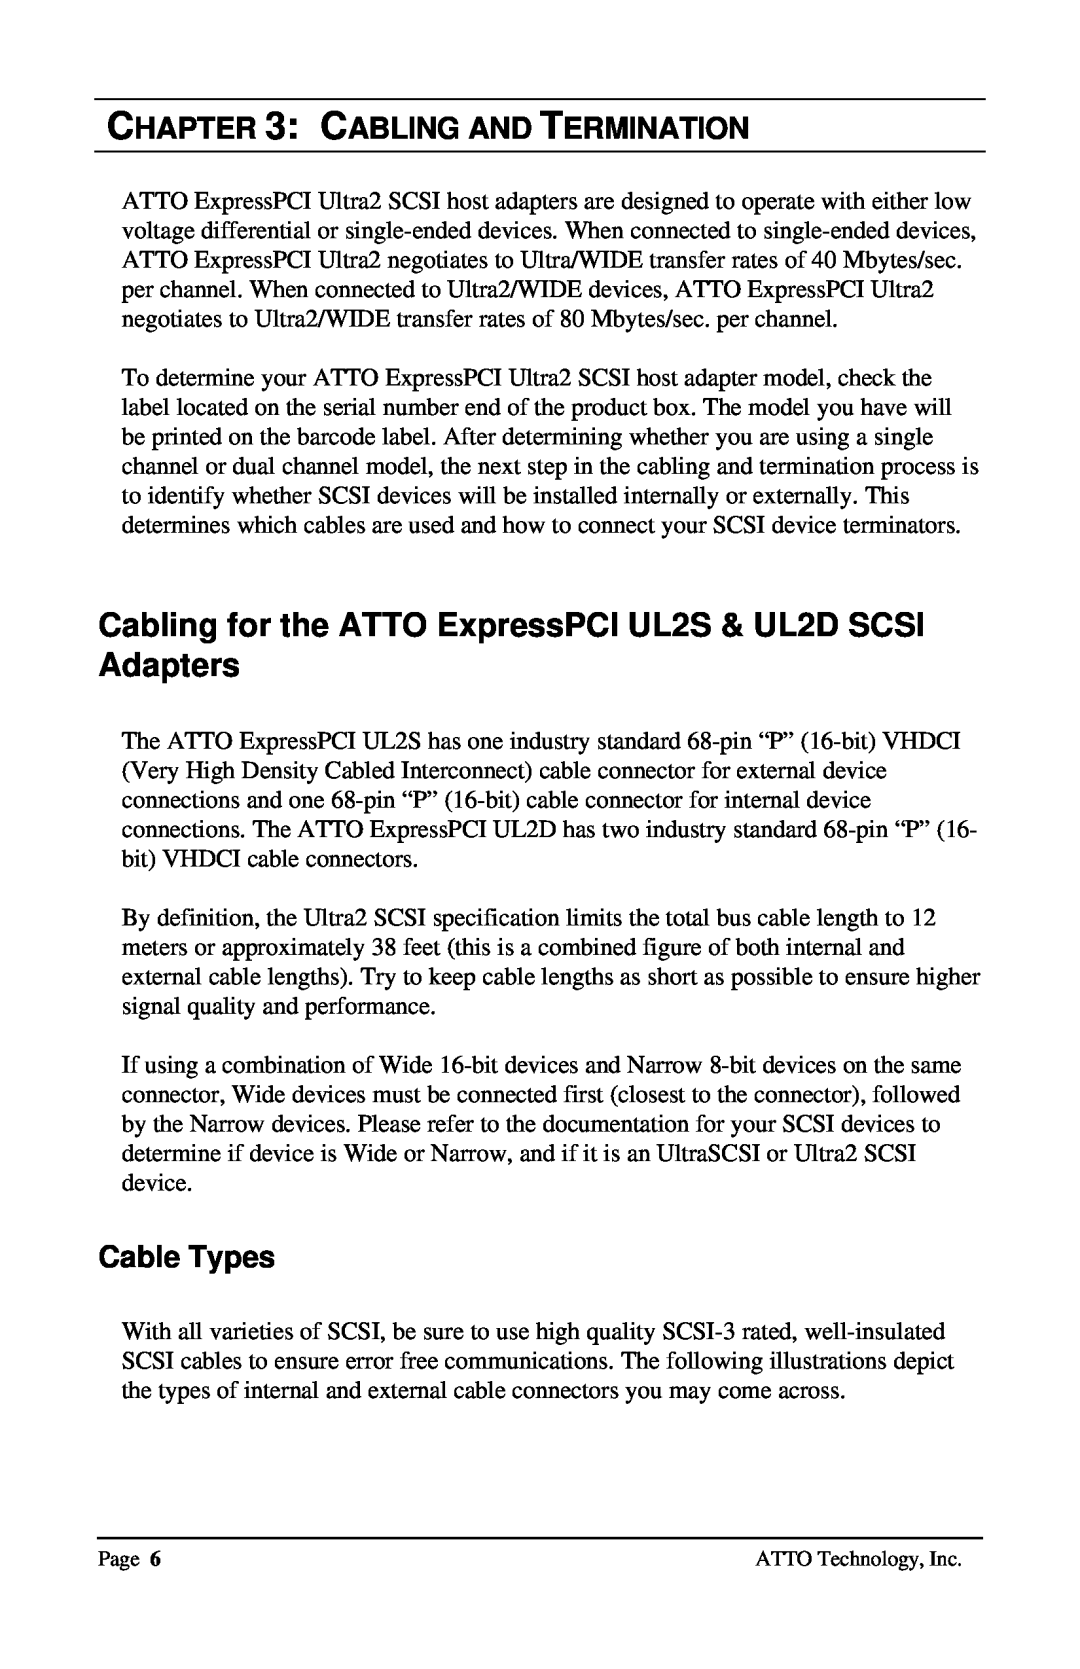 ATTO Technology UL25 Cabling for the ATTO ExpressPCI UL2S & UL2D SCSI Adapters, Cabling And Termination, Cable Types 